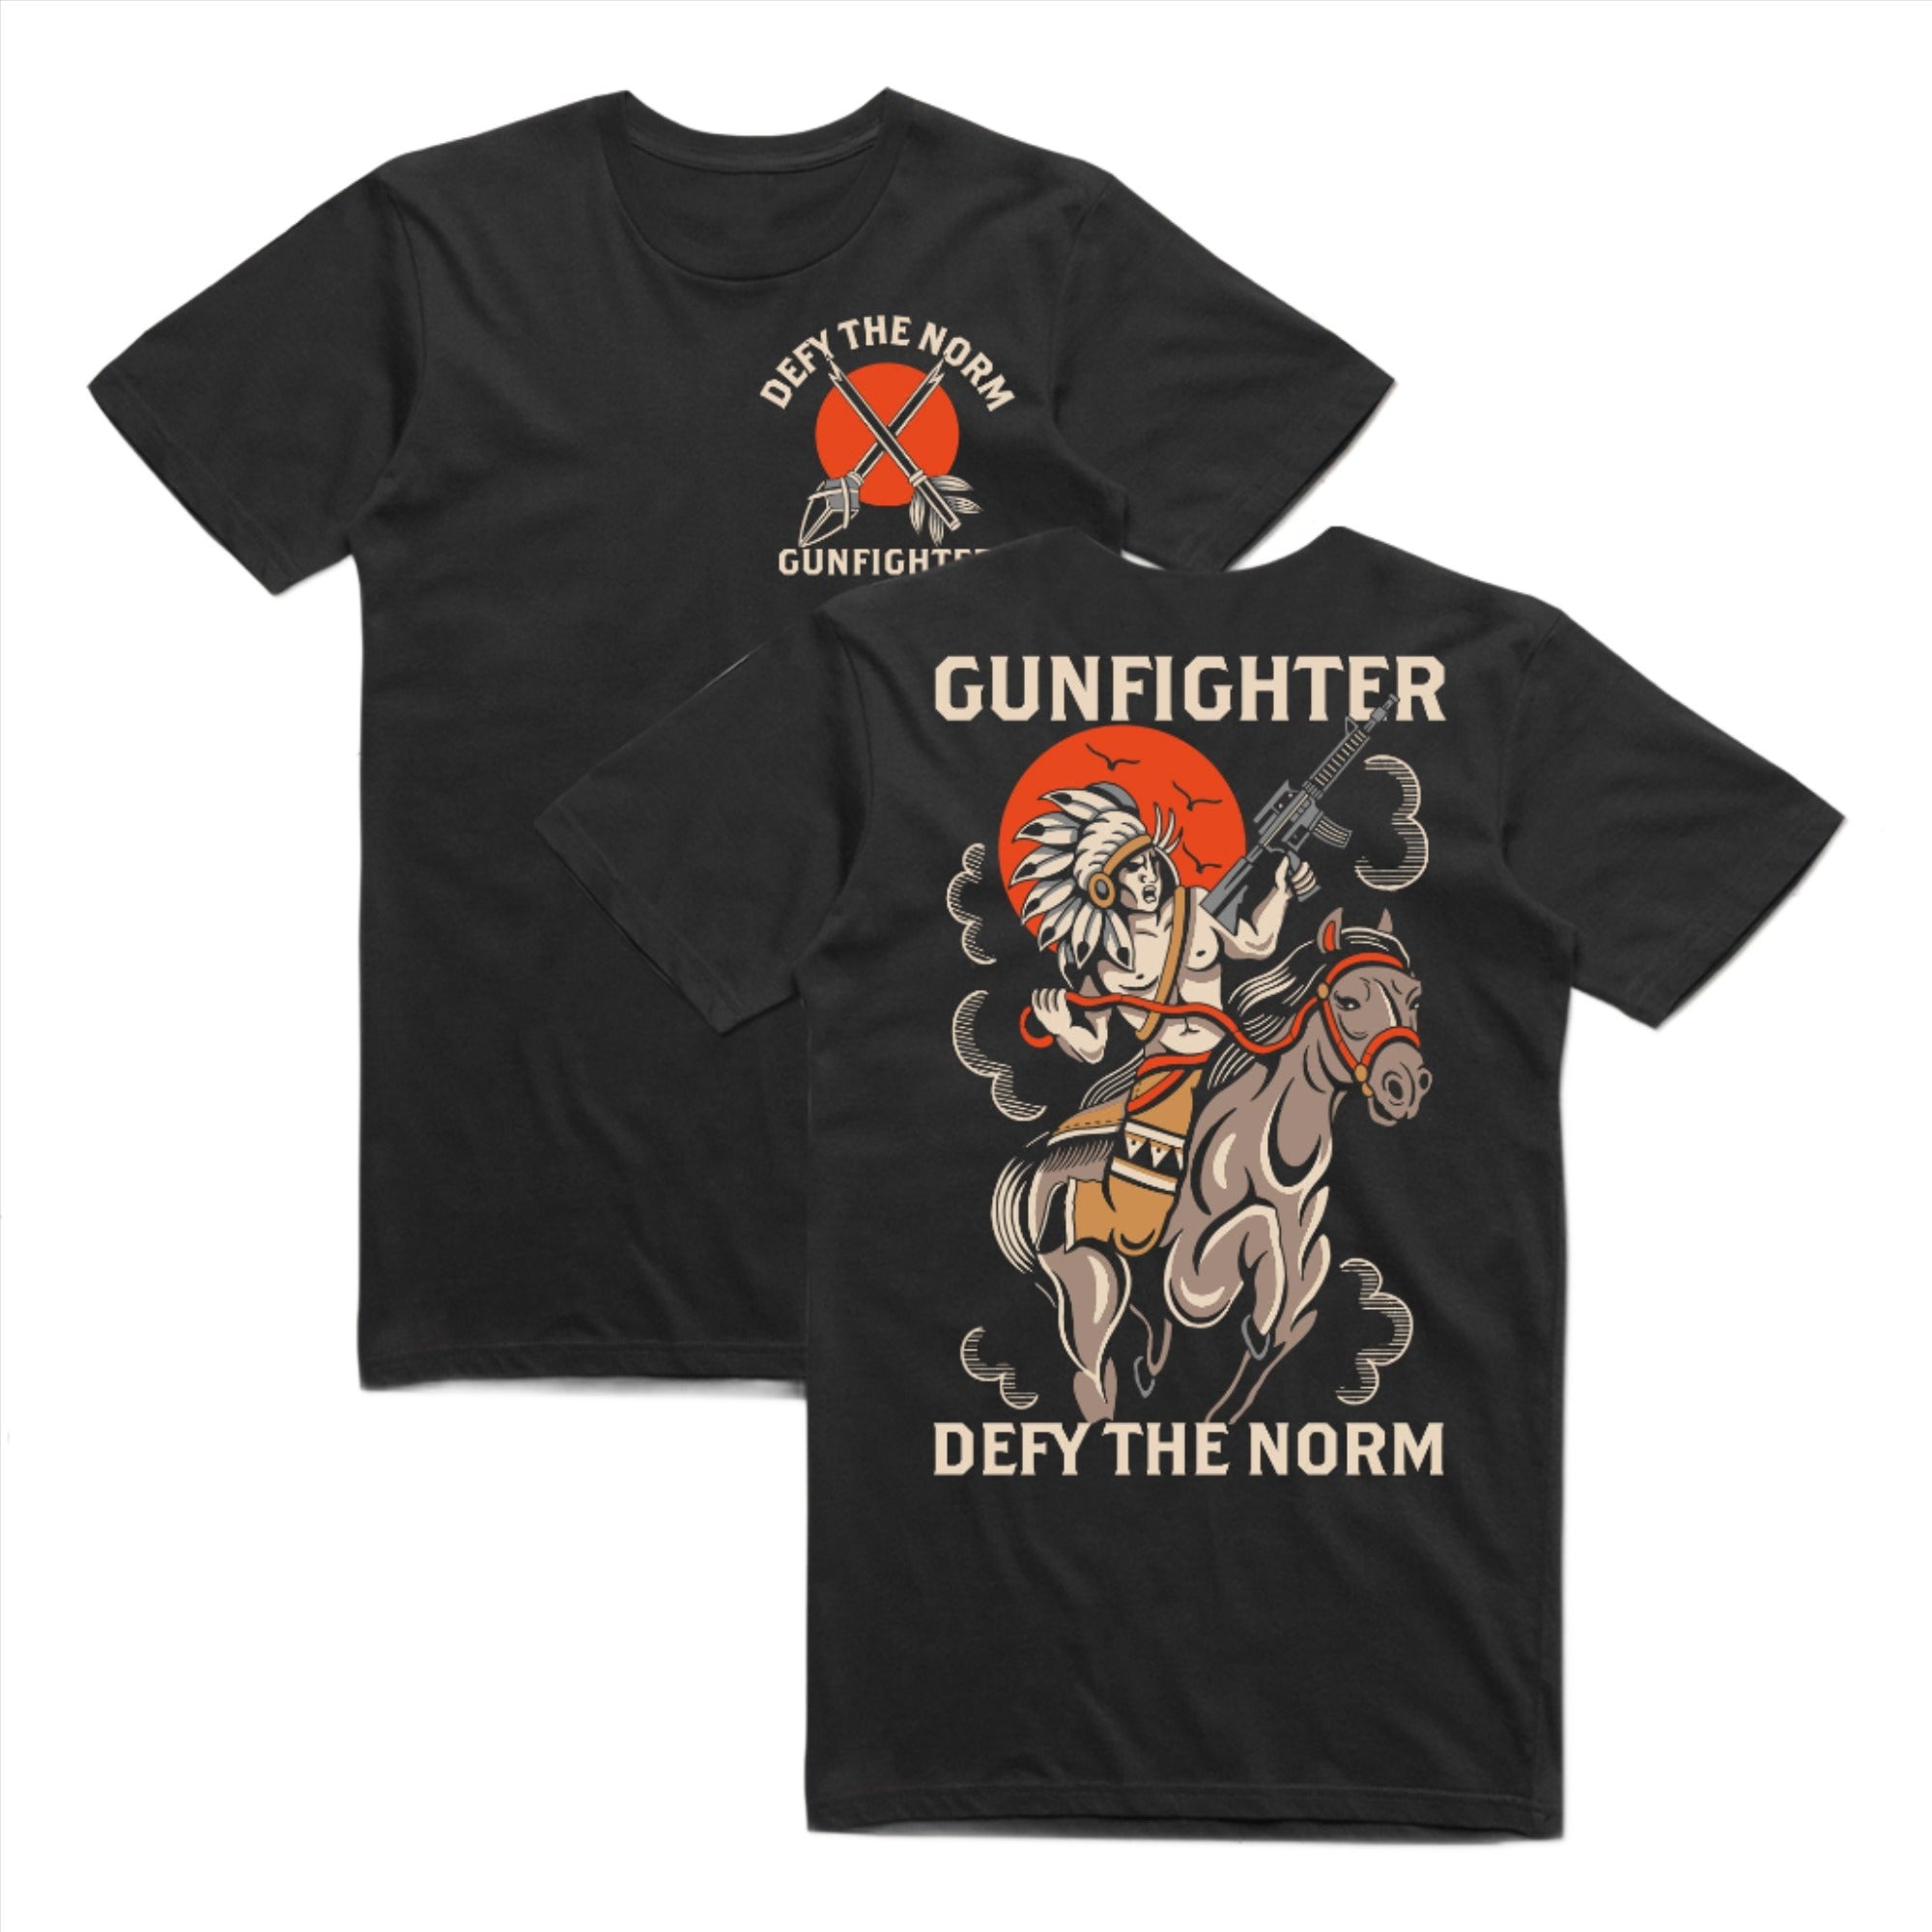 Gunfighter Tee + Raffle Entry For Ultimate Machinegun Experience - Launching March 28th